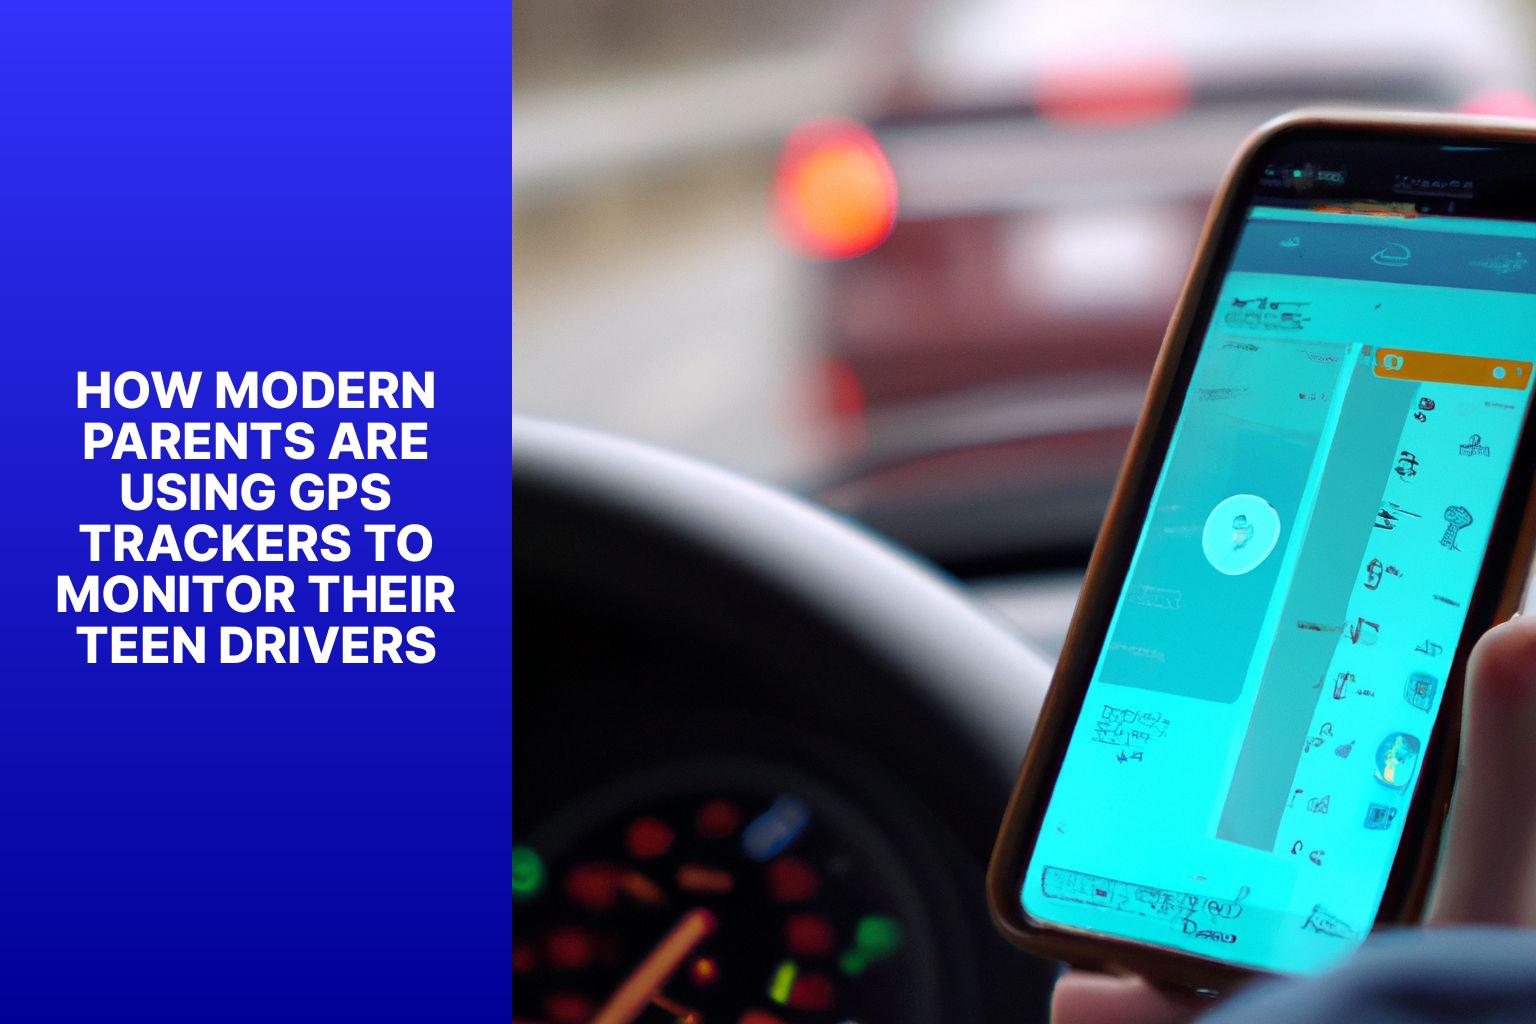 How Modern Parents are Using GPS Trackers to Monitor Their Teen Drivers